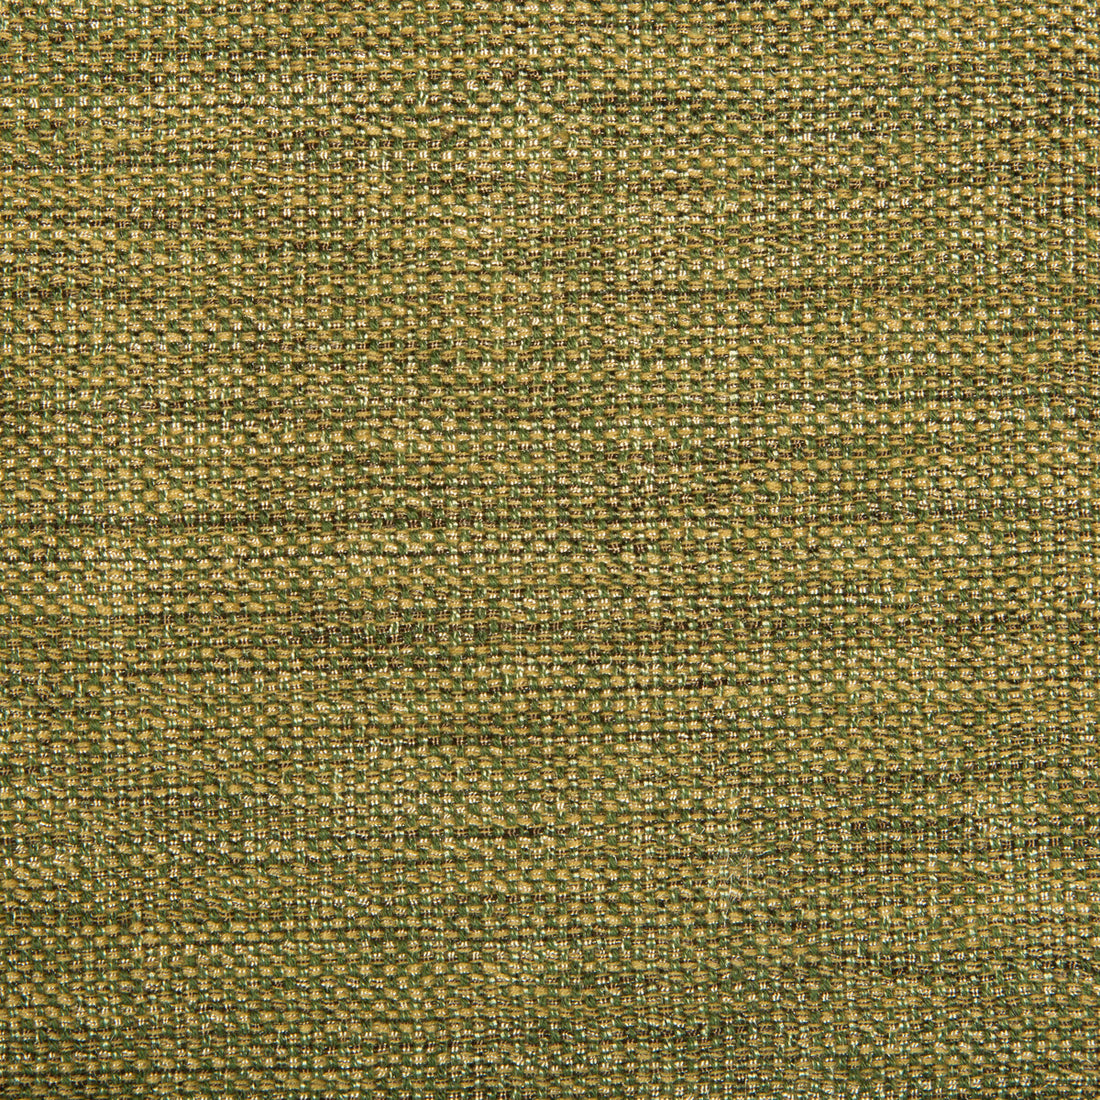 Kravet Contract fabric in 34926-314 color - pattern 34926.314.0 - by Kravet Contract